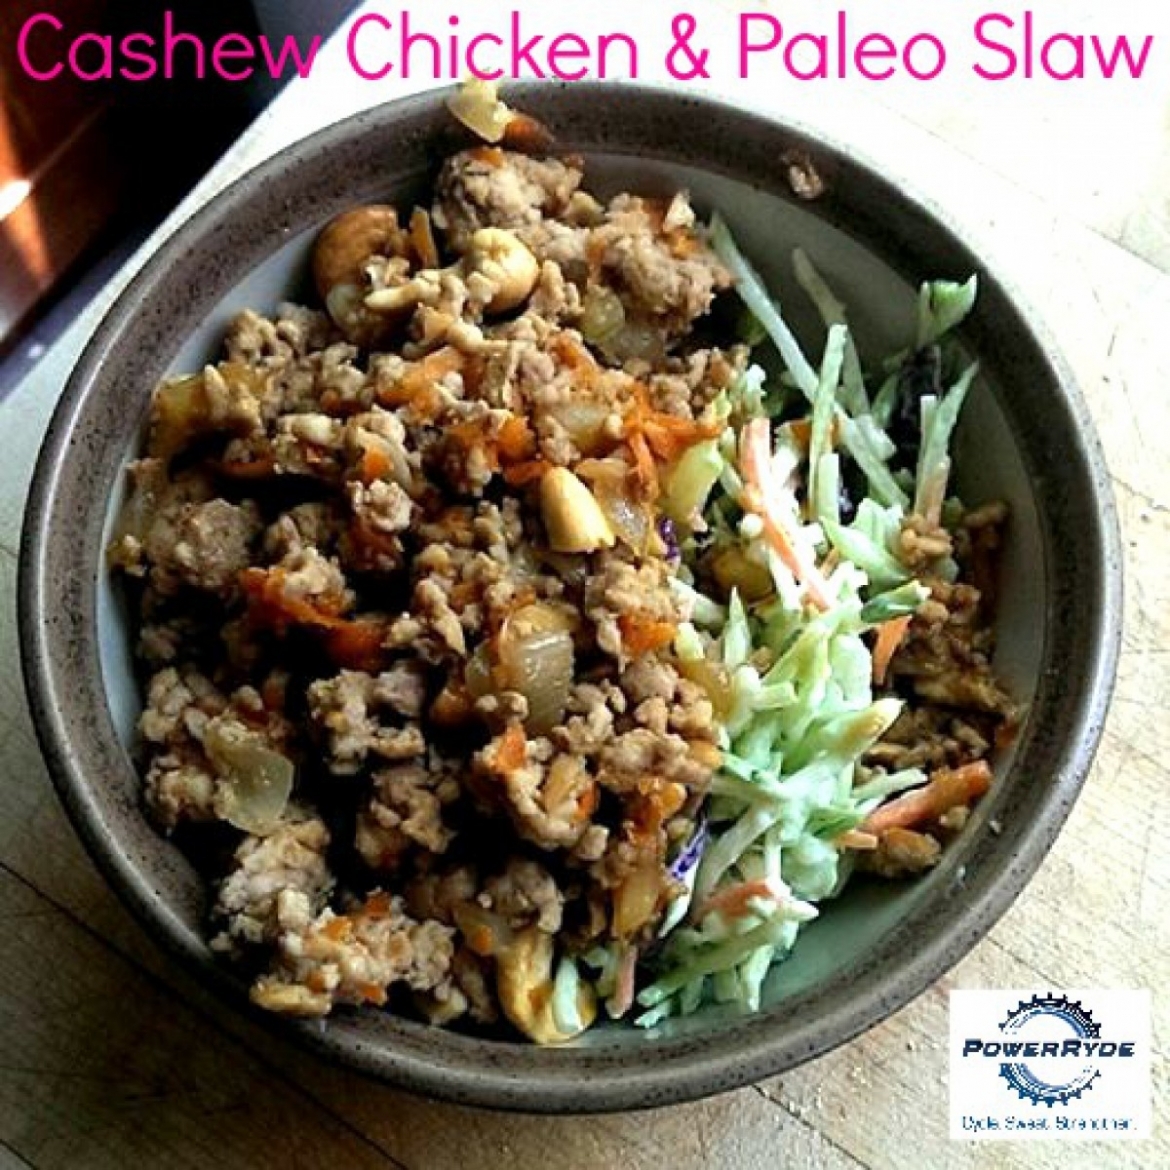 Cashew Chicken with Paleo Cole Slaw and PowerRyde logo